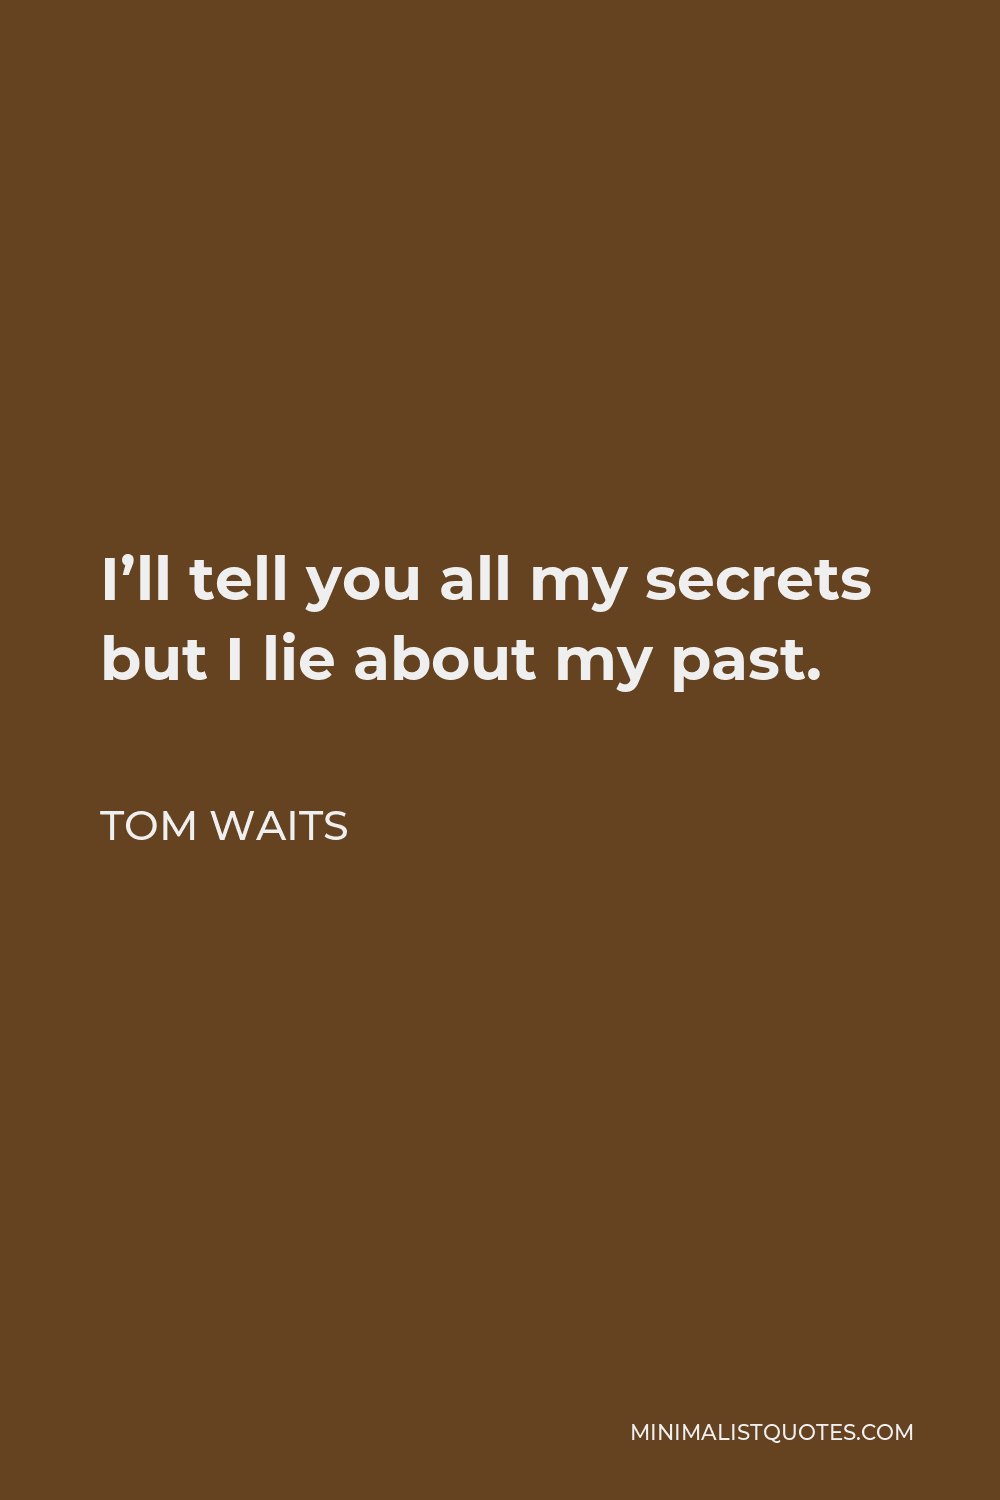 Tom Waits Quote - I’ll tell you all my secrets but I lie about my past.